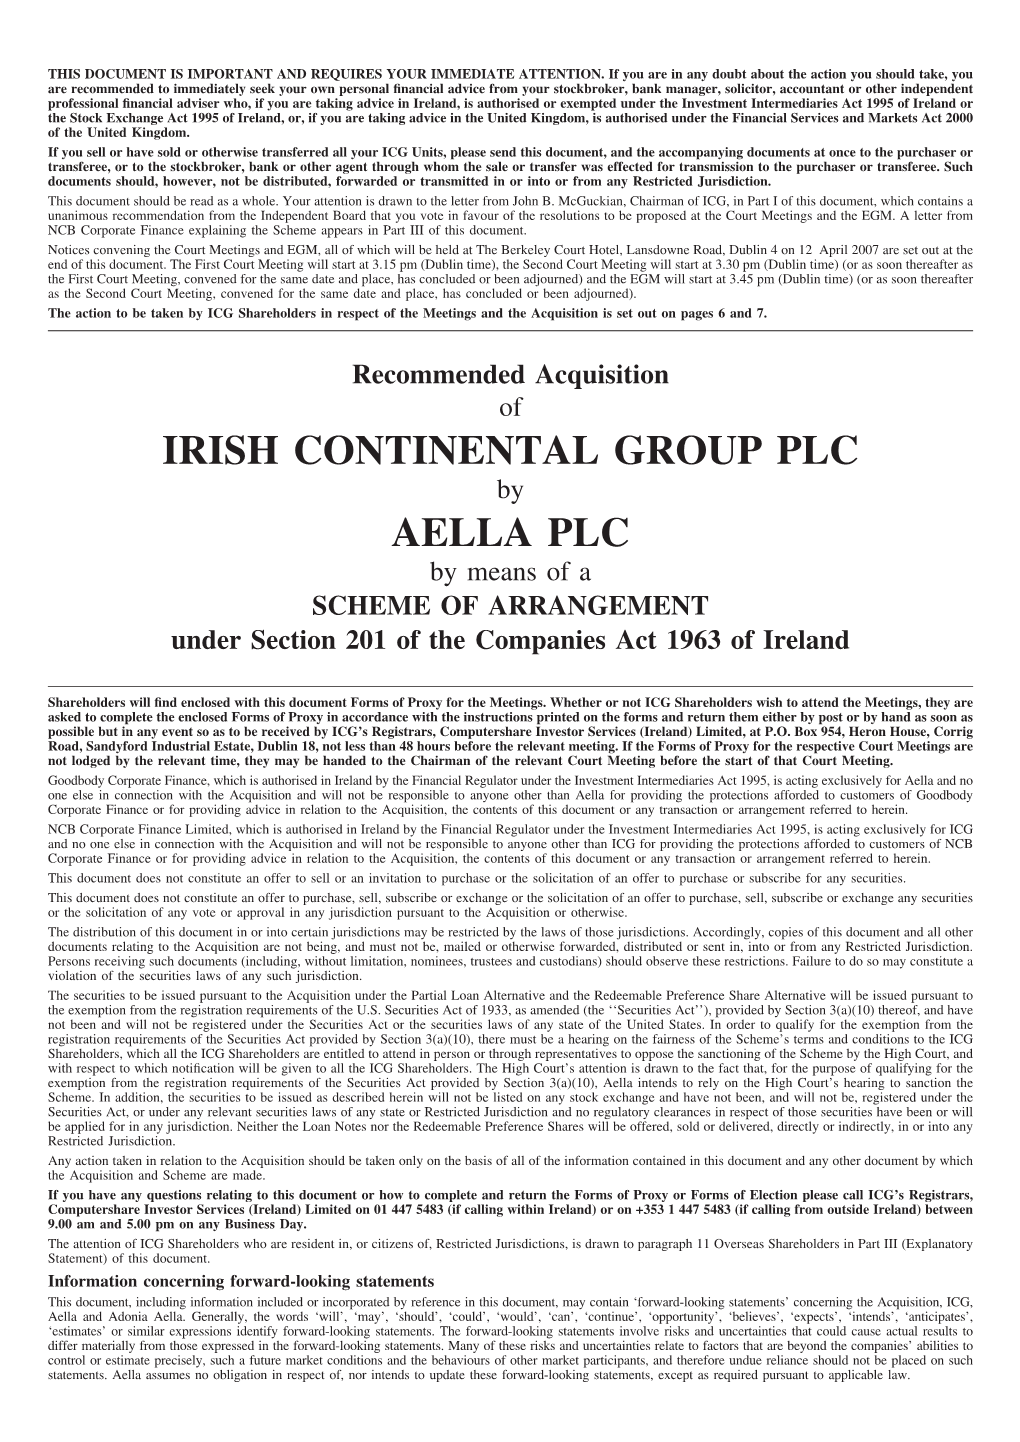 Recommended Acquisition of ICG PLC by Aella